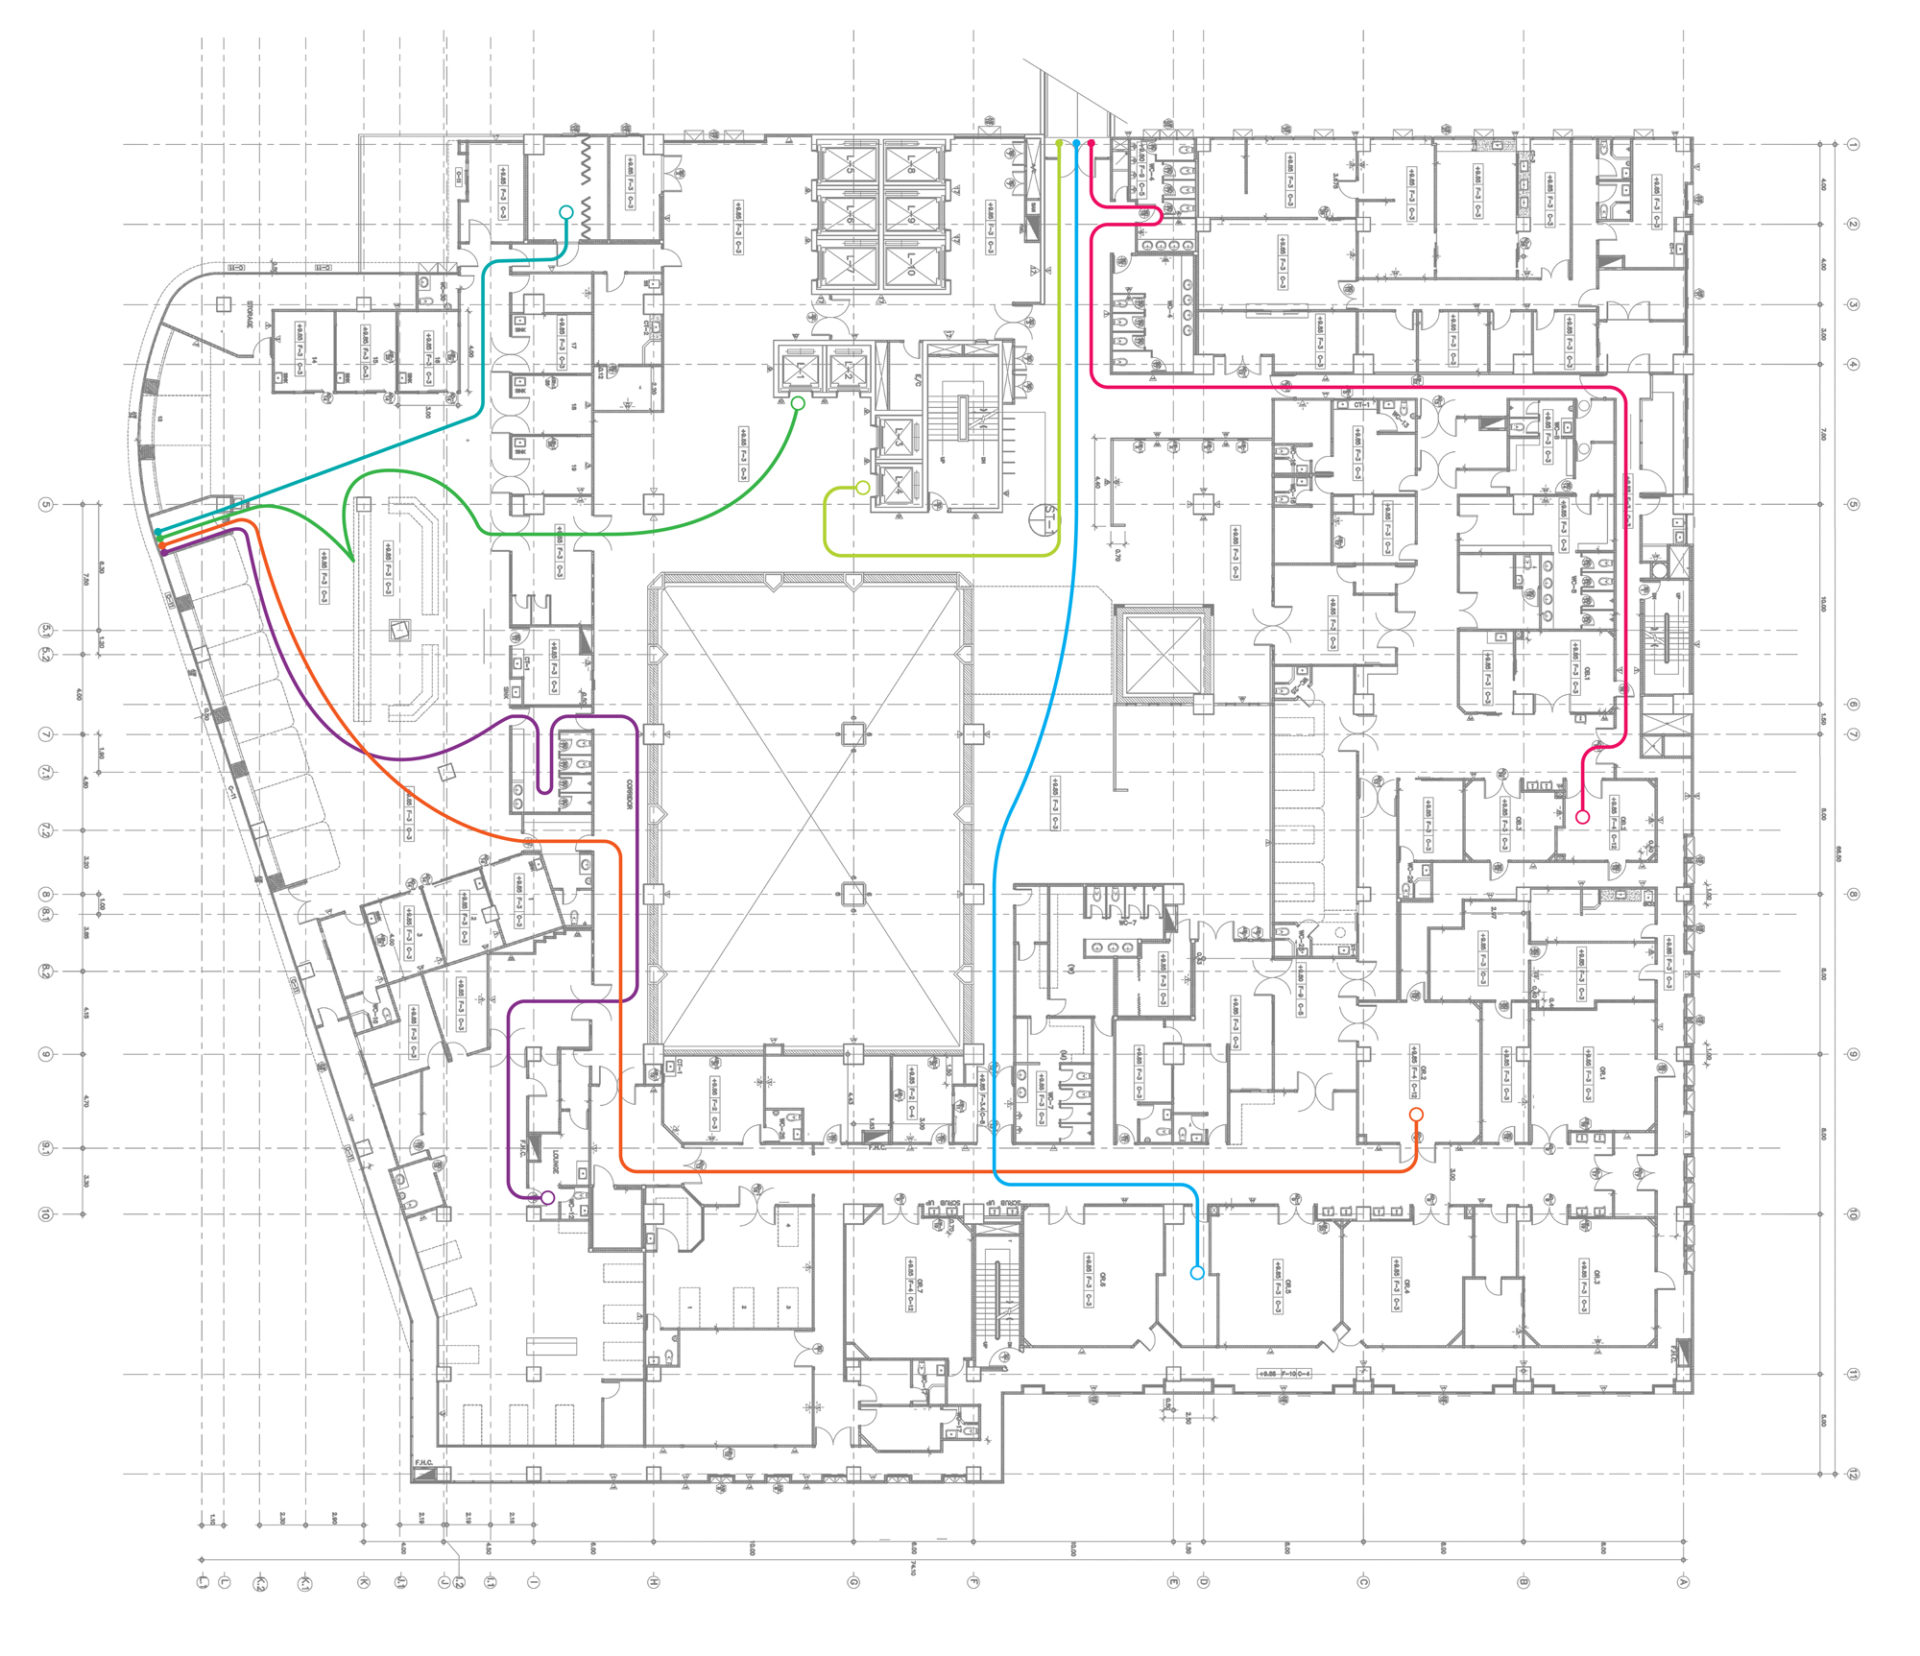 Hospital floor plan showing pathways and how different user-types might move through the space.